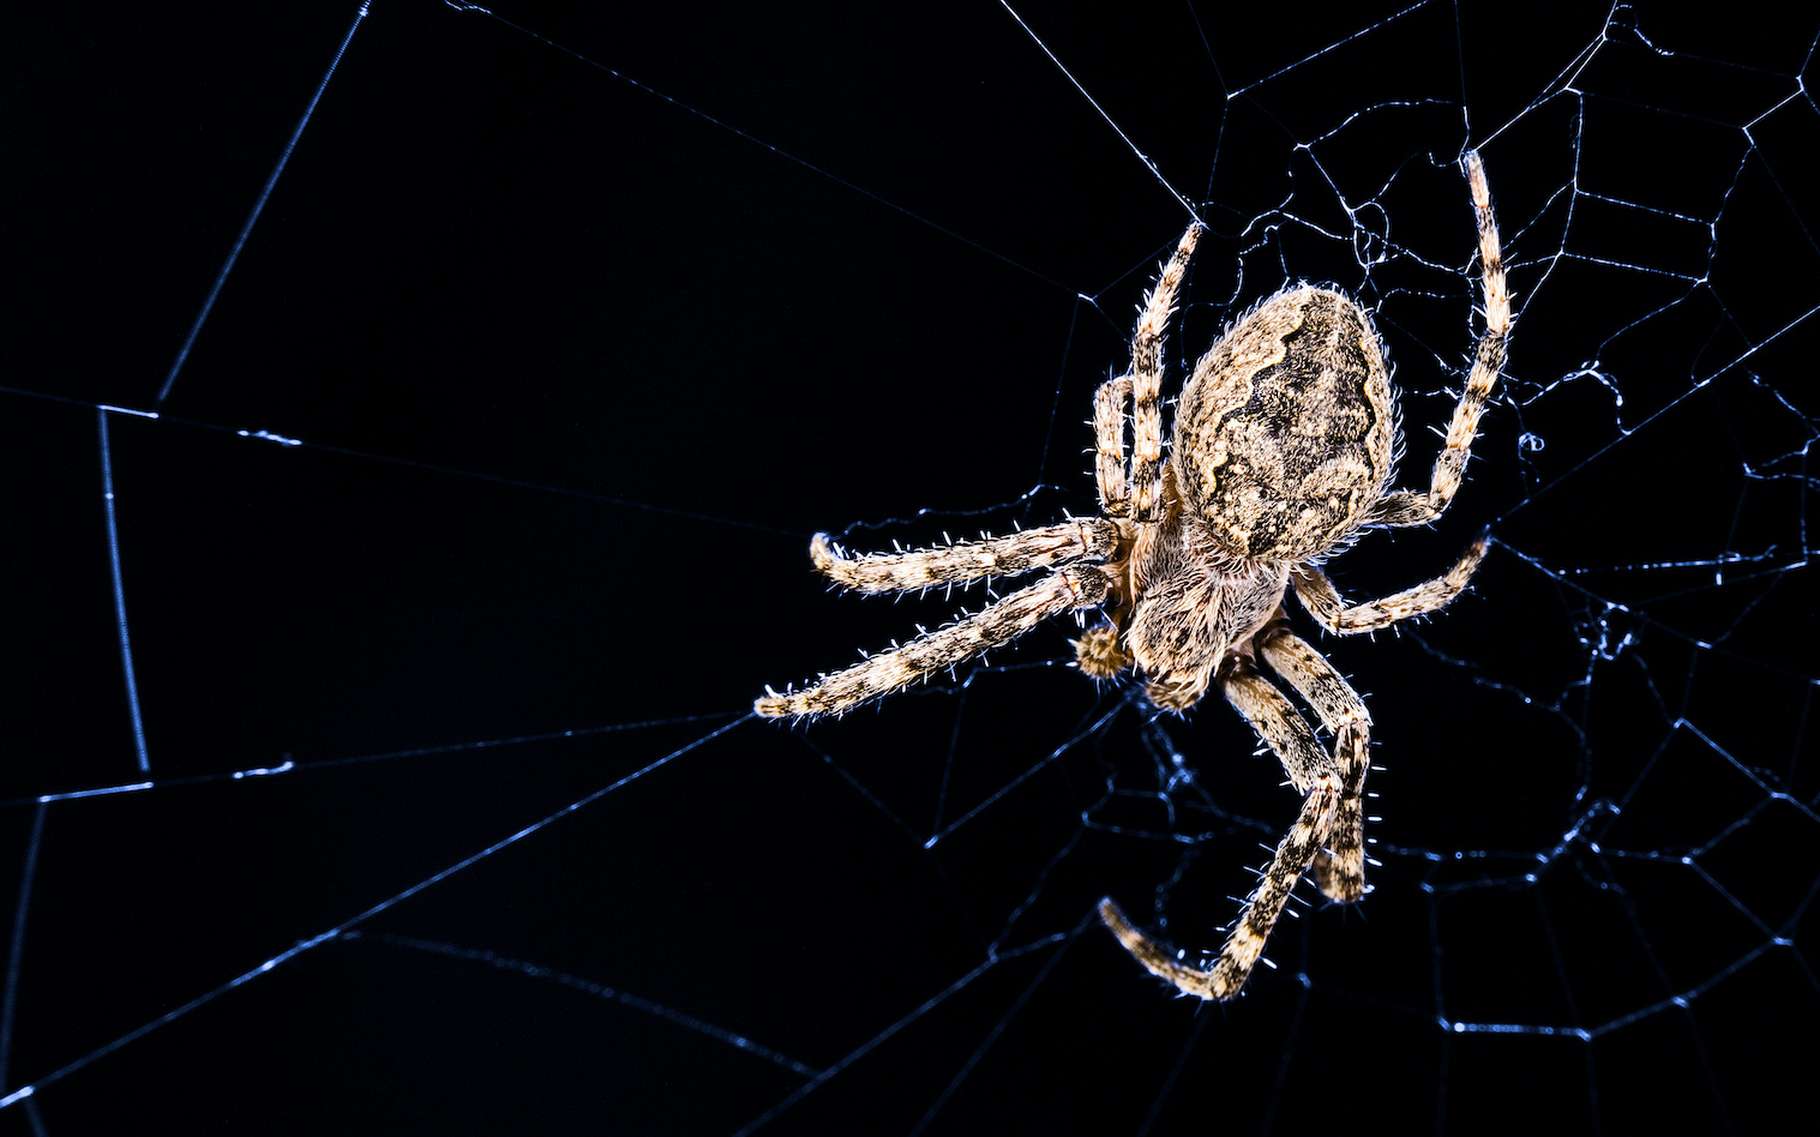 Spiders use their web to listen better